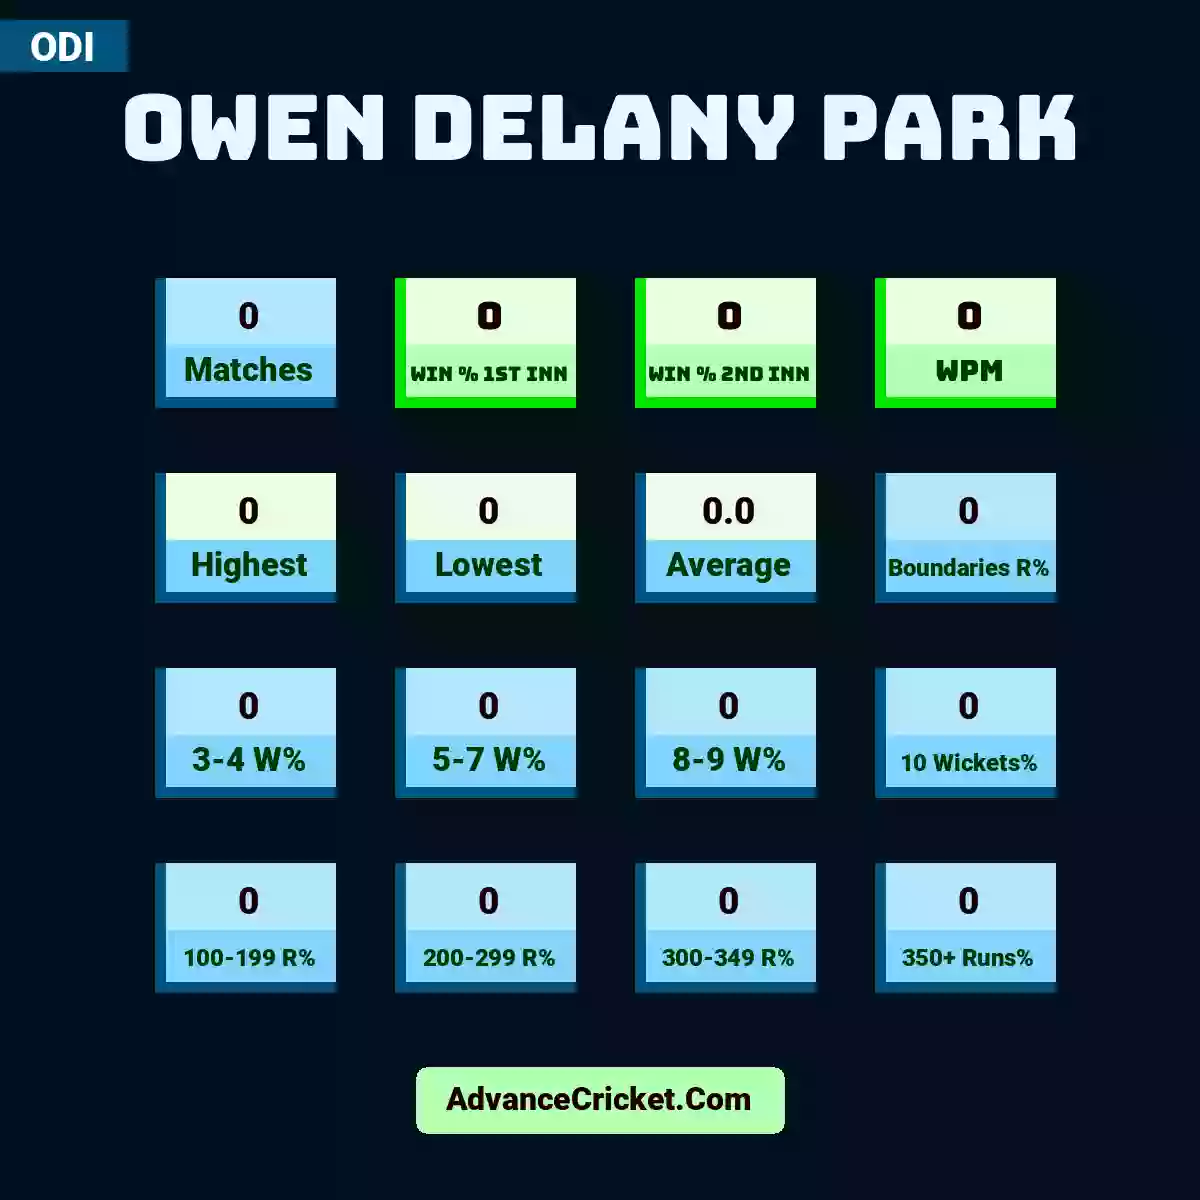 Image showing Owen Delany Park with Matches: 0, Win % 1st Inn: 0, Win % 2nd Inn: 0, WPM: 0, Highest: 0, Lowest: 0, Average: 0.0, Boundaries R%: 0, 3-4 W%: 0, 5-7 W%: 0, 8-9 W%: 0, 10 Wickets%: 0, 100-199 R%: 0, 200-299 R%: 0, 300-349 R%: 0, 350+ Runs%: 0.